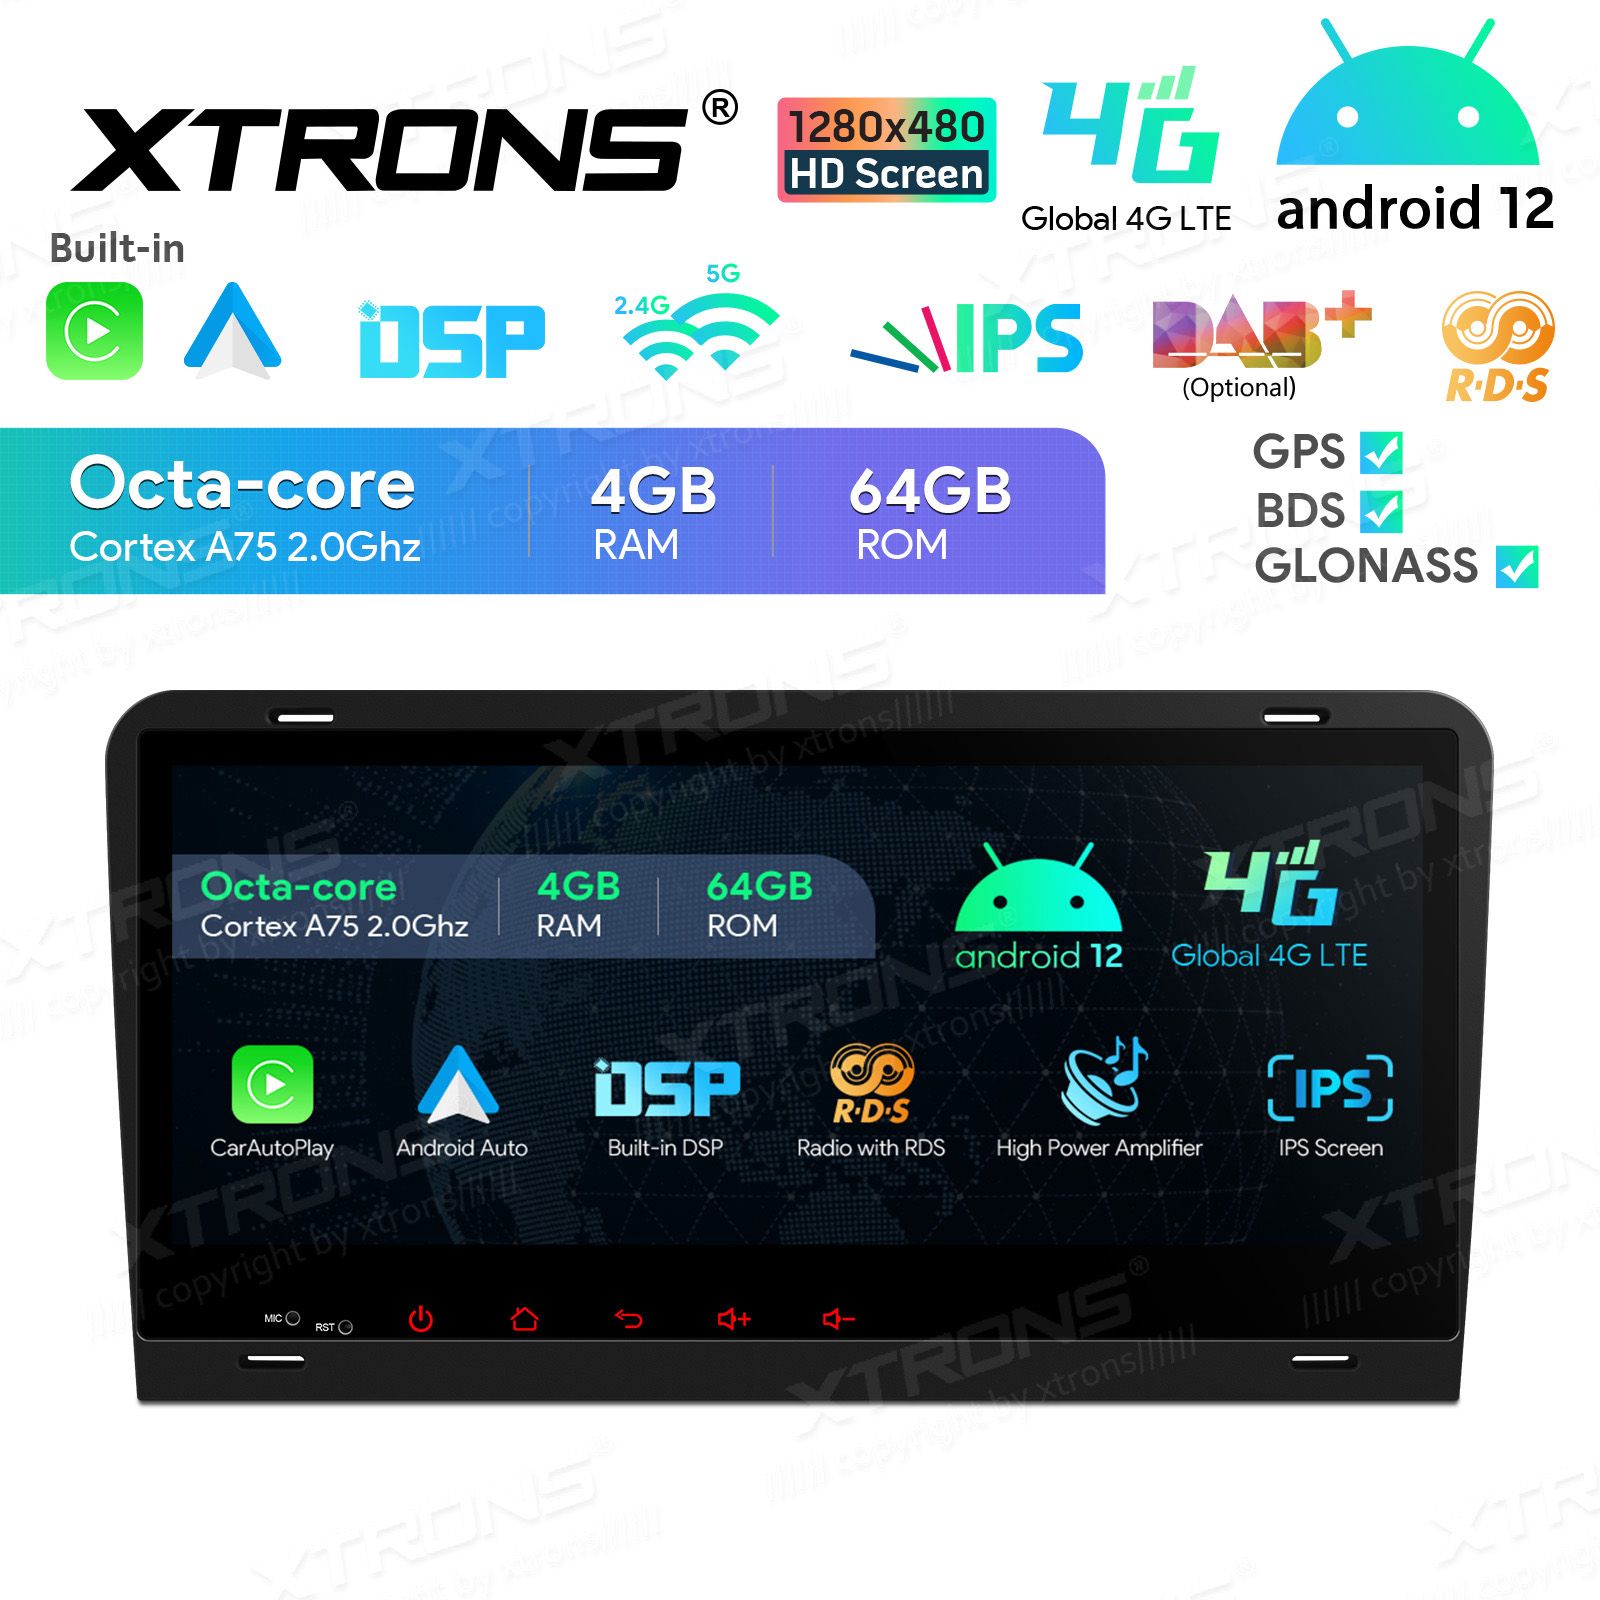 XTRONS ANDROID 10 Autoradio im Audi A3 - Unboxing & Test 